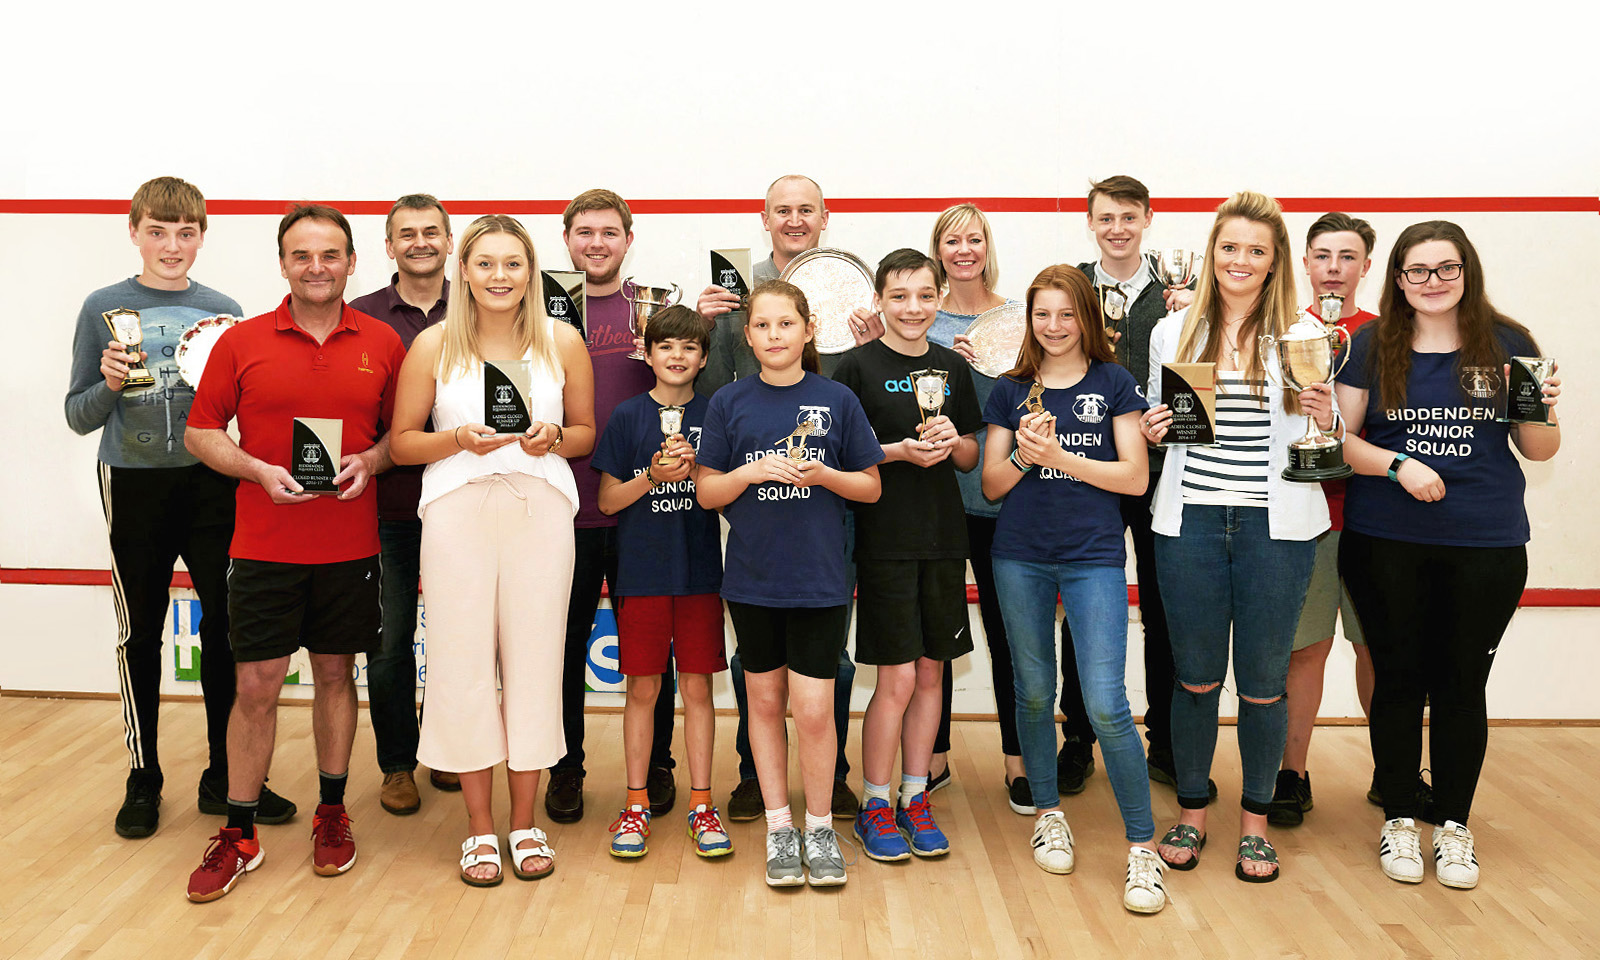 The winning players from the 2017 Biddenden Squash Club - Closed Competition.